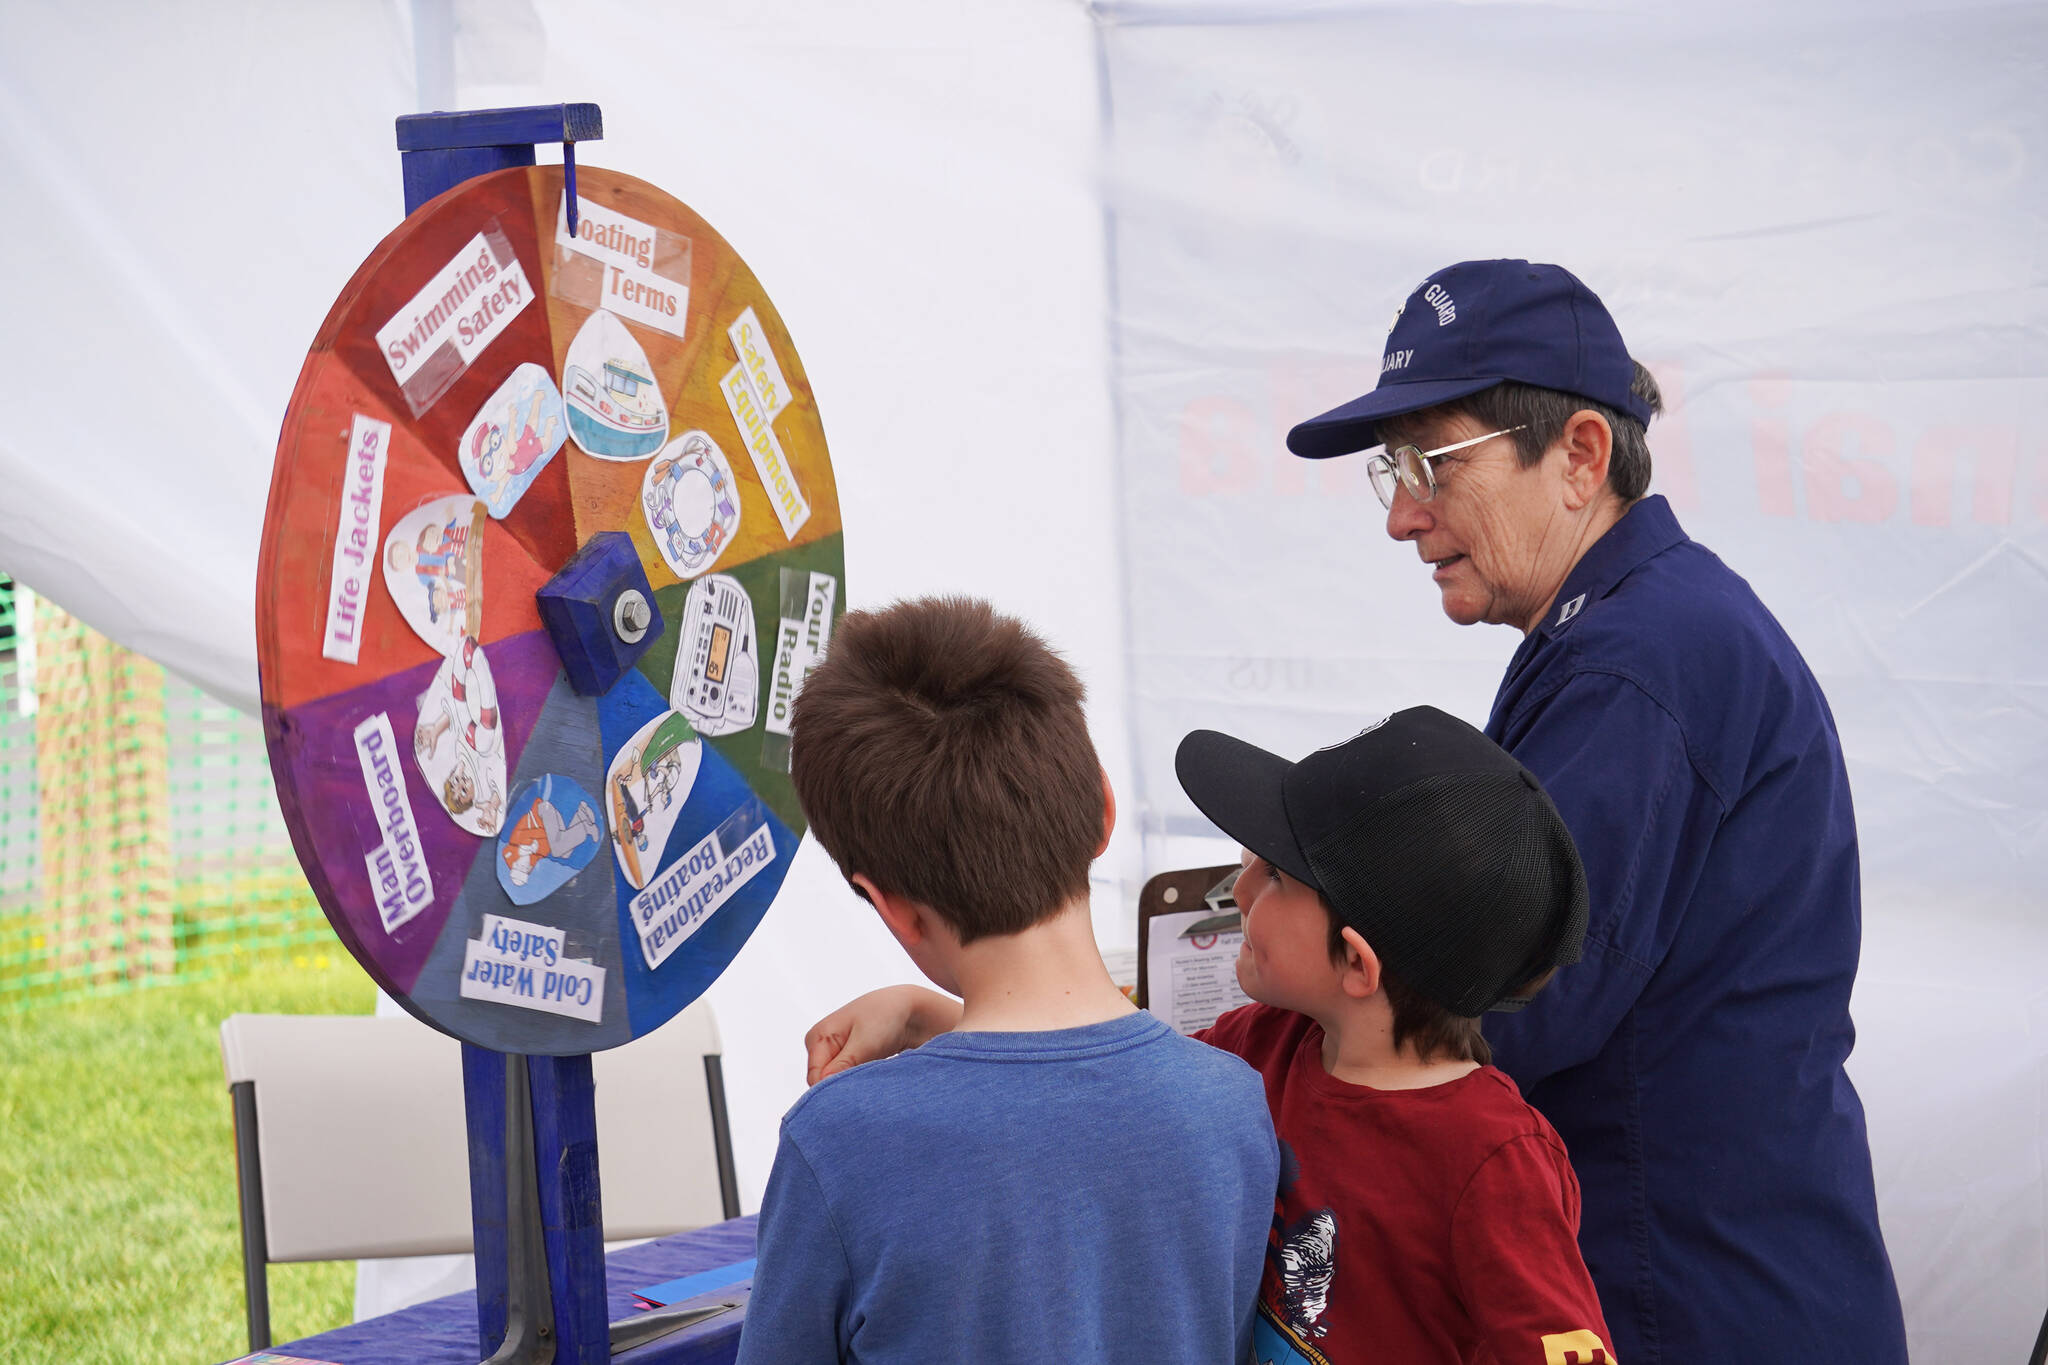 Kids spin a wheel and answer boating questions at a booth run by the U.S. Coast Guard Auxiliary during the Kenai River Festival on Friday, June 9, 2023, at Soldotna Creek Park in Soldotna, Alaska. (Jake Dye/Peninsula Clarion)